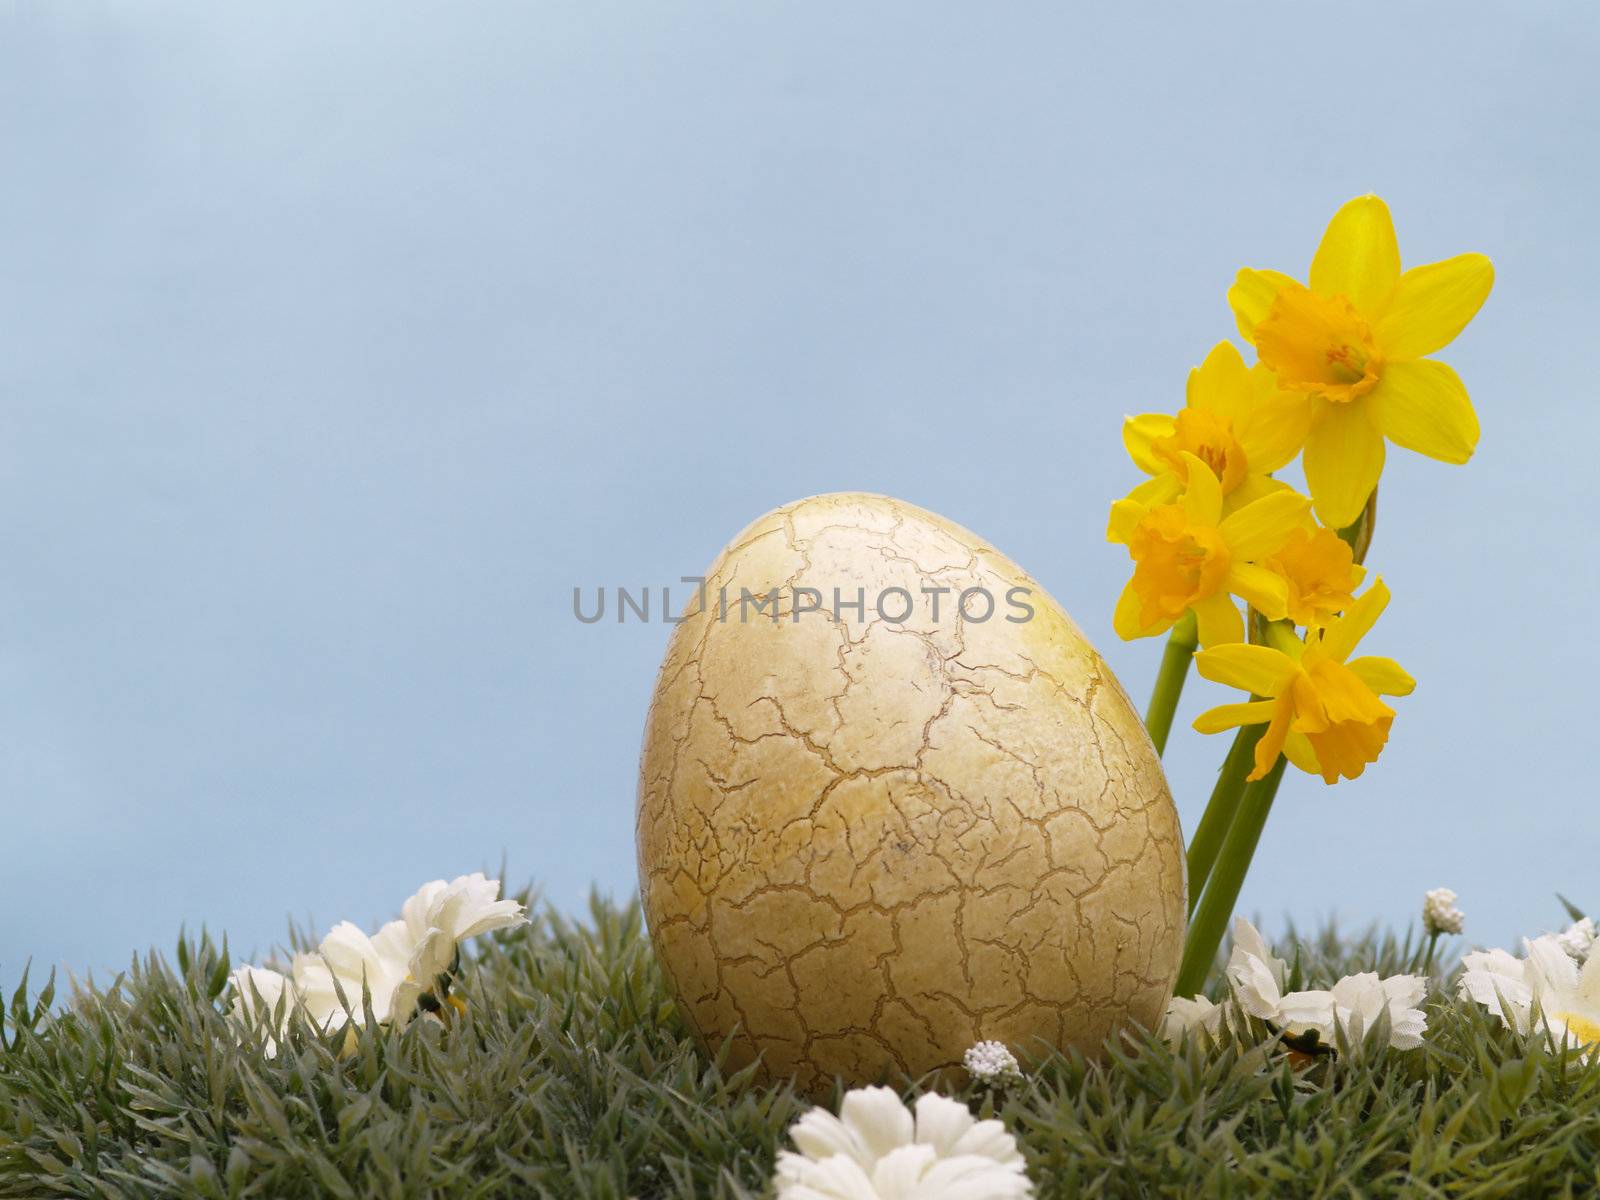 easter egg with drarf daffodils on artificial grass and blossoms, light blue background